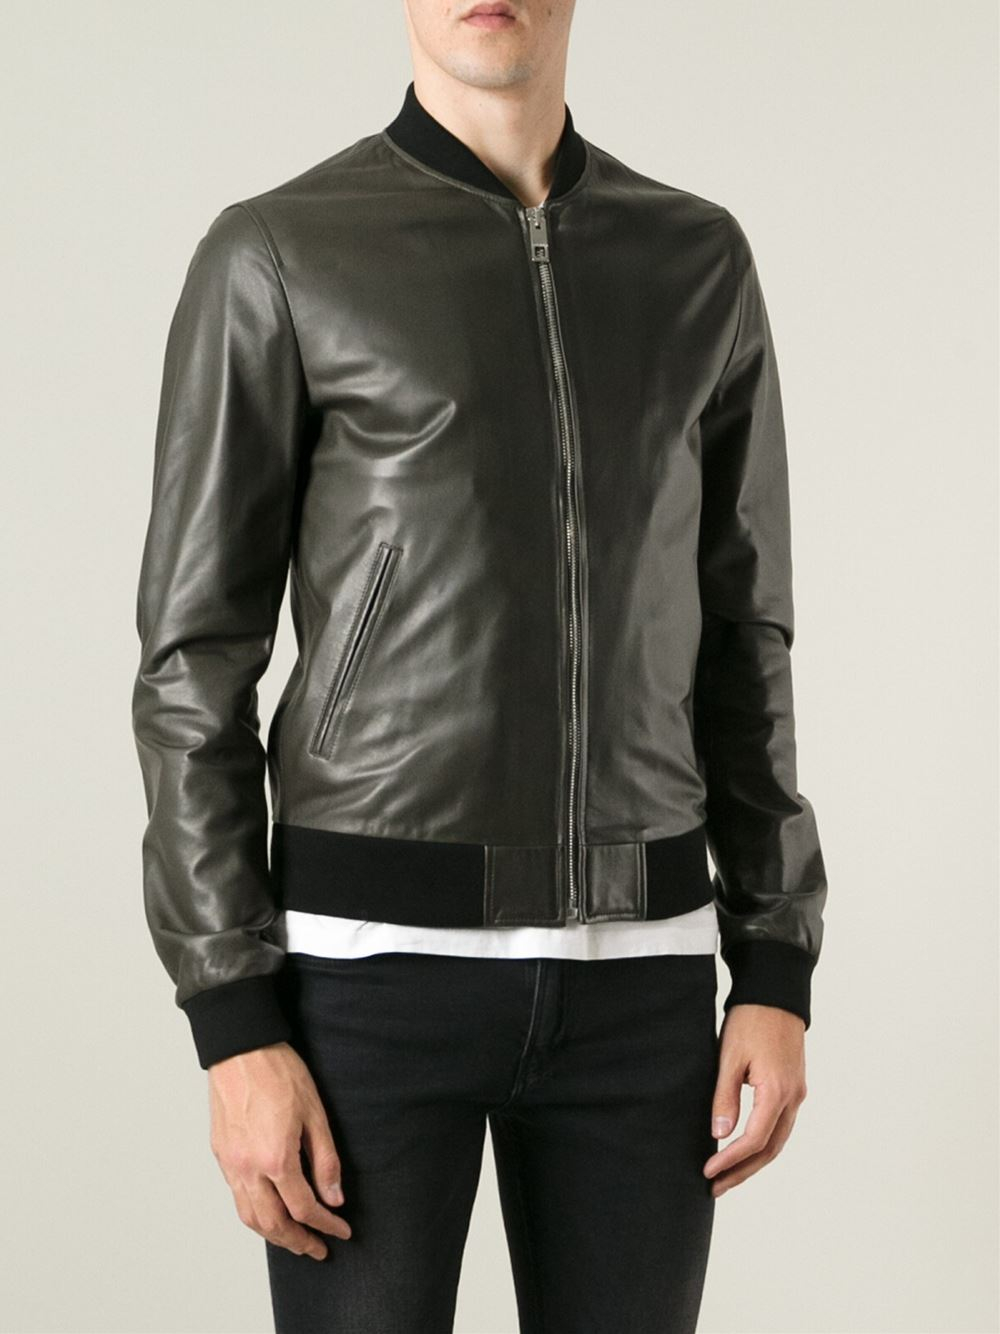 Dolce & gabbana Leather Bomber Jacket in Green for Men | Lyst